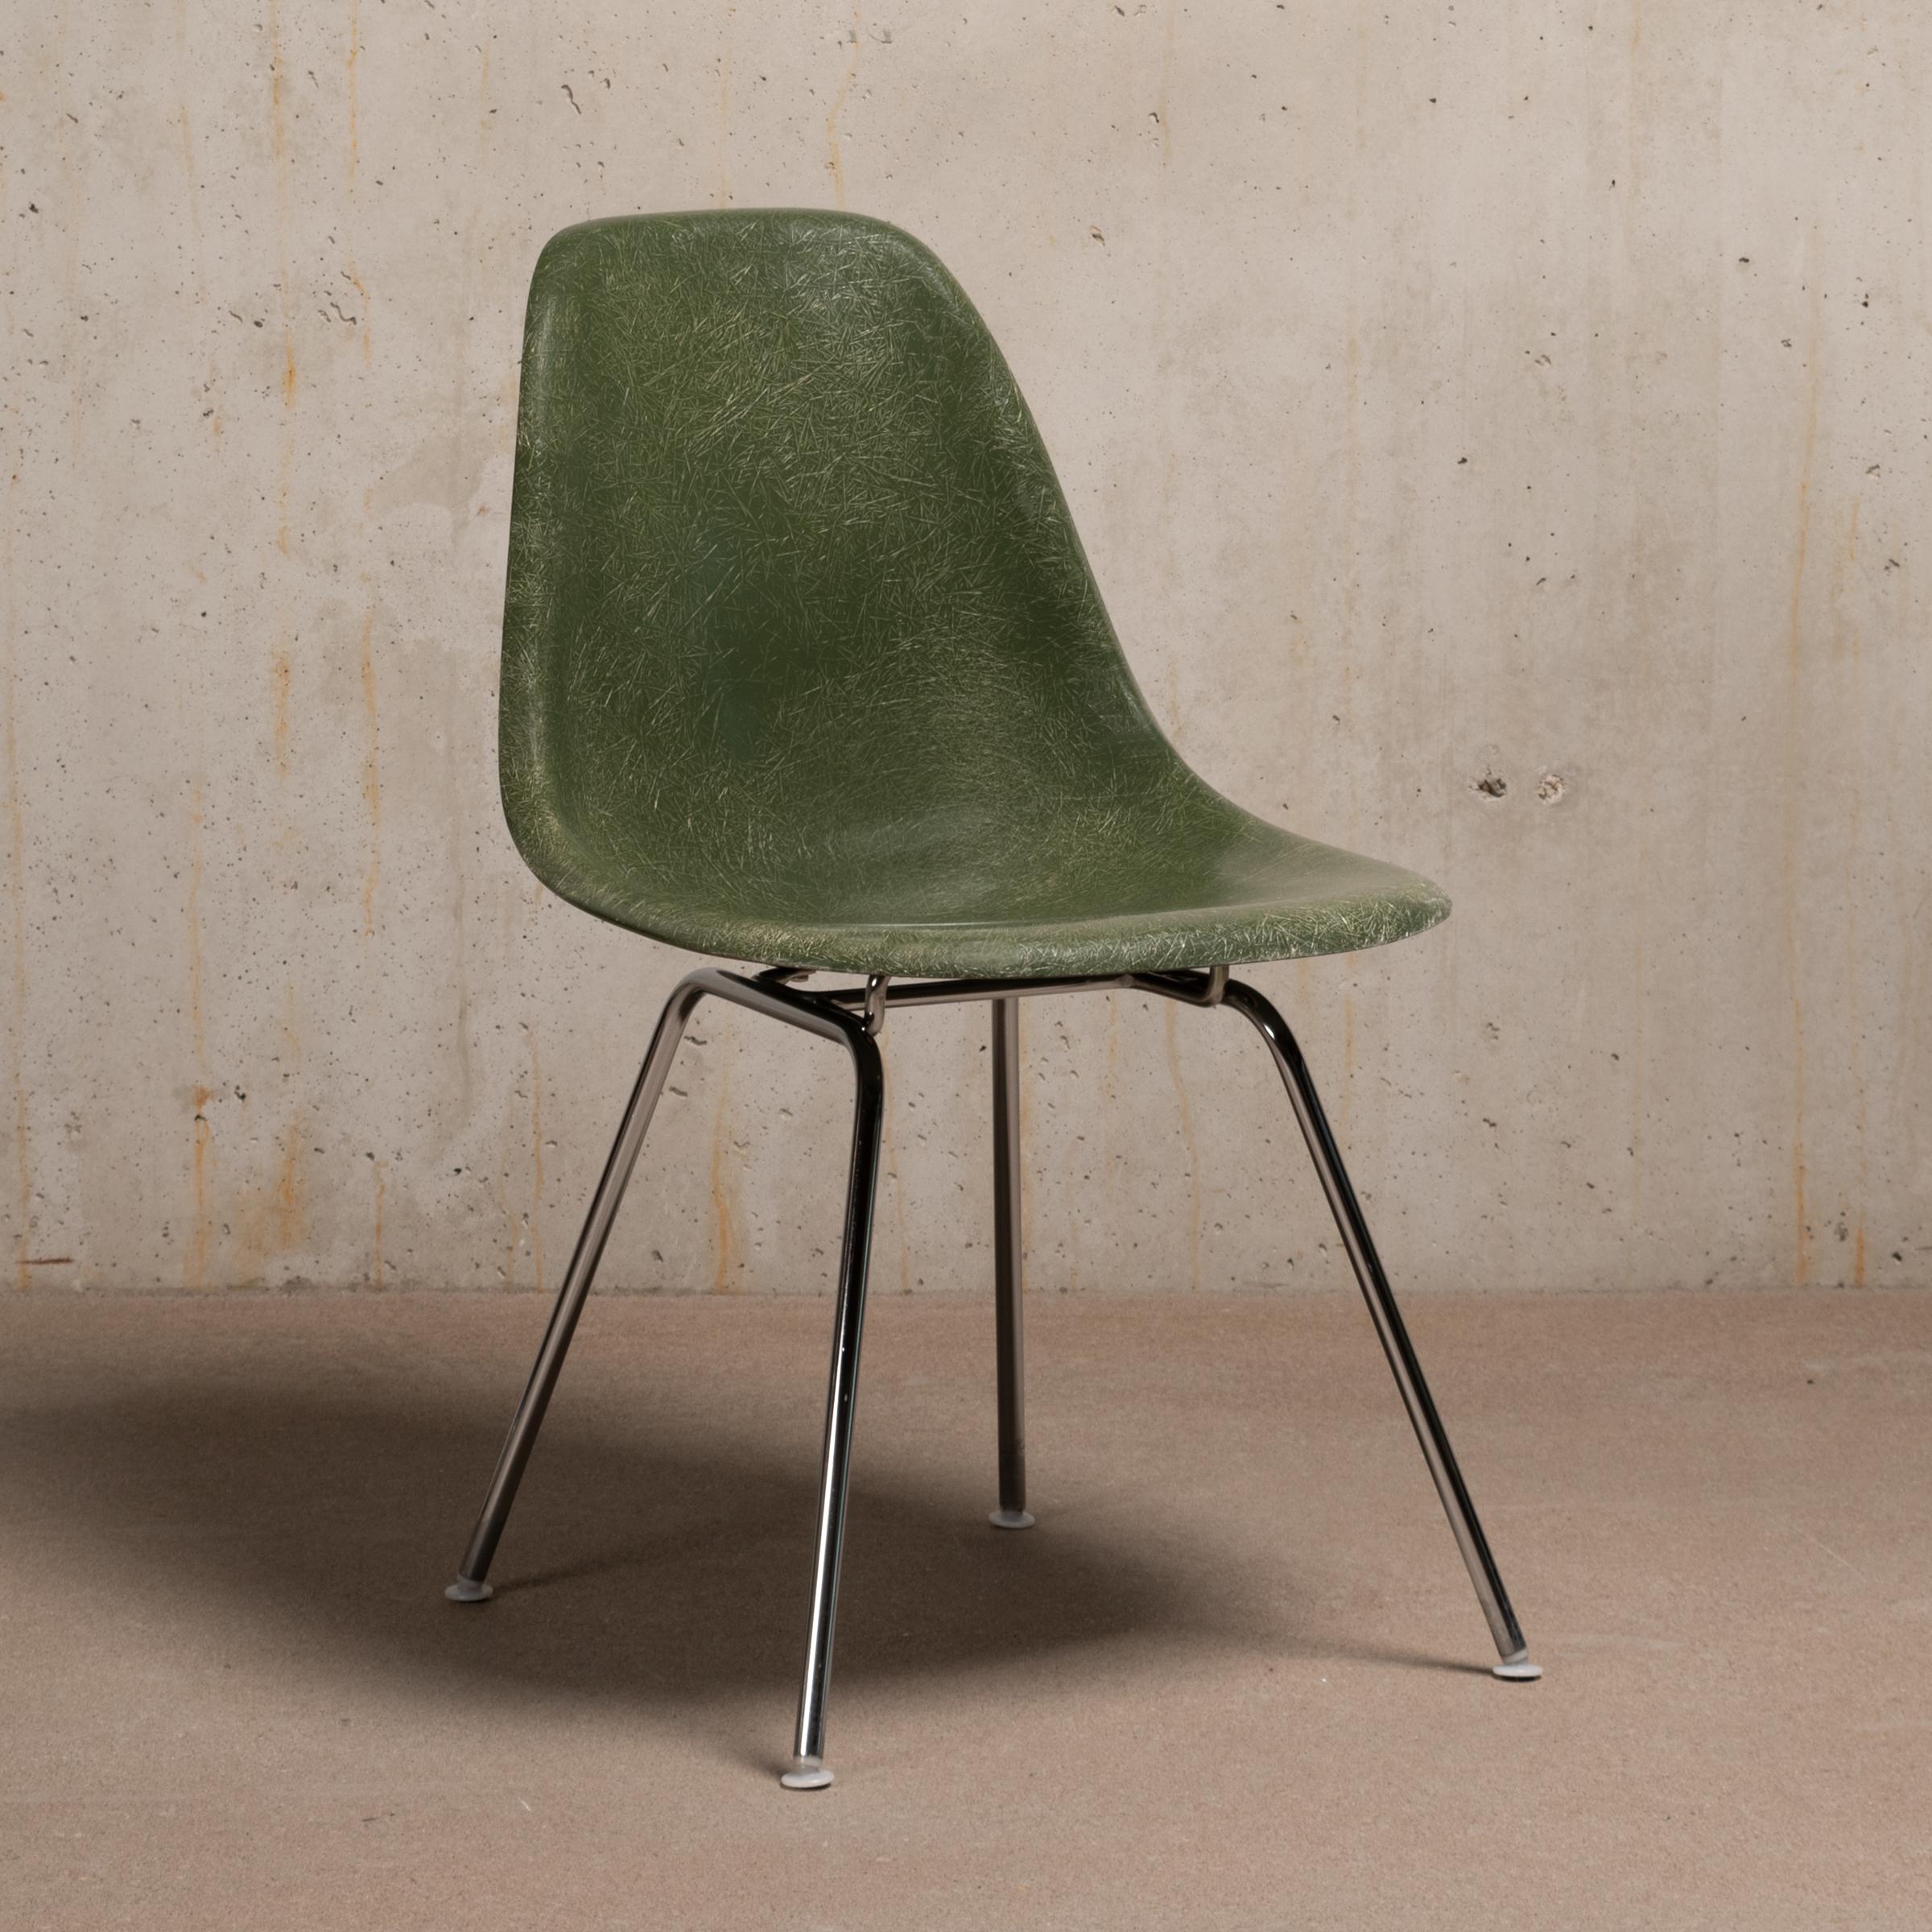 Iconic DSX chair designed by Charles and Ray Eames for Herman Miller International Collection (Vitra). Molded fibreglass shells in the colour Olive Green Dark with chrome plated steel H-bases. All in very good original condition with only minor